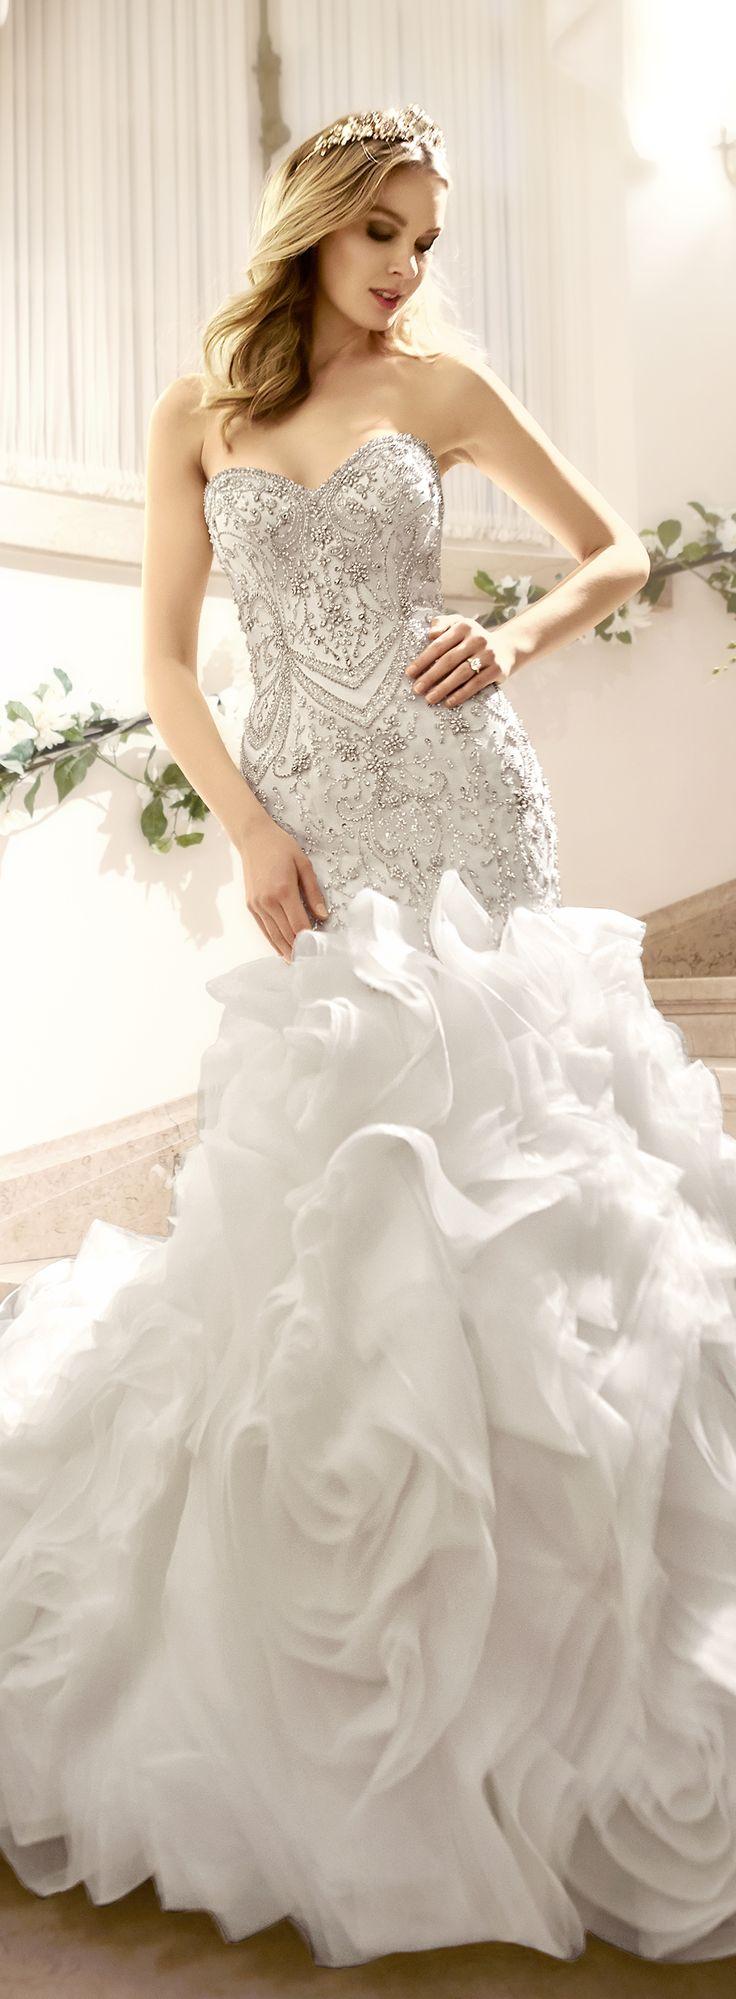 Wedding - Wedding Dress With Beaded Bodice And Textured Skirt 